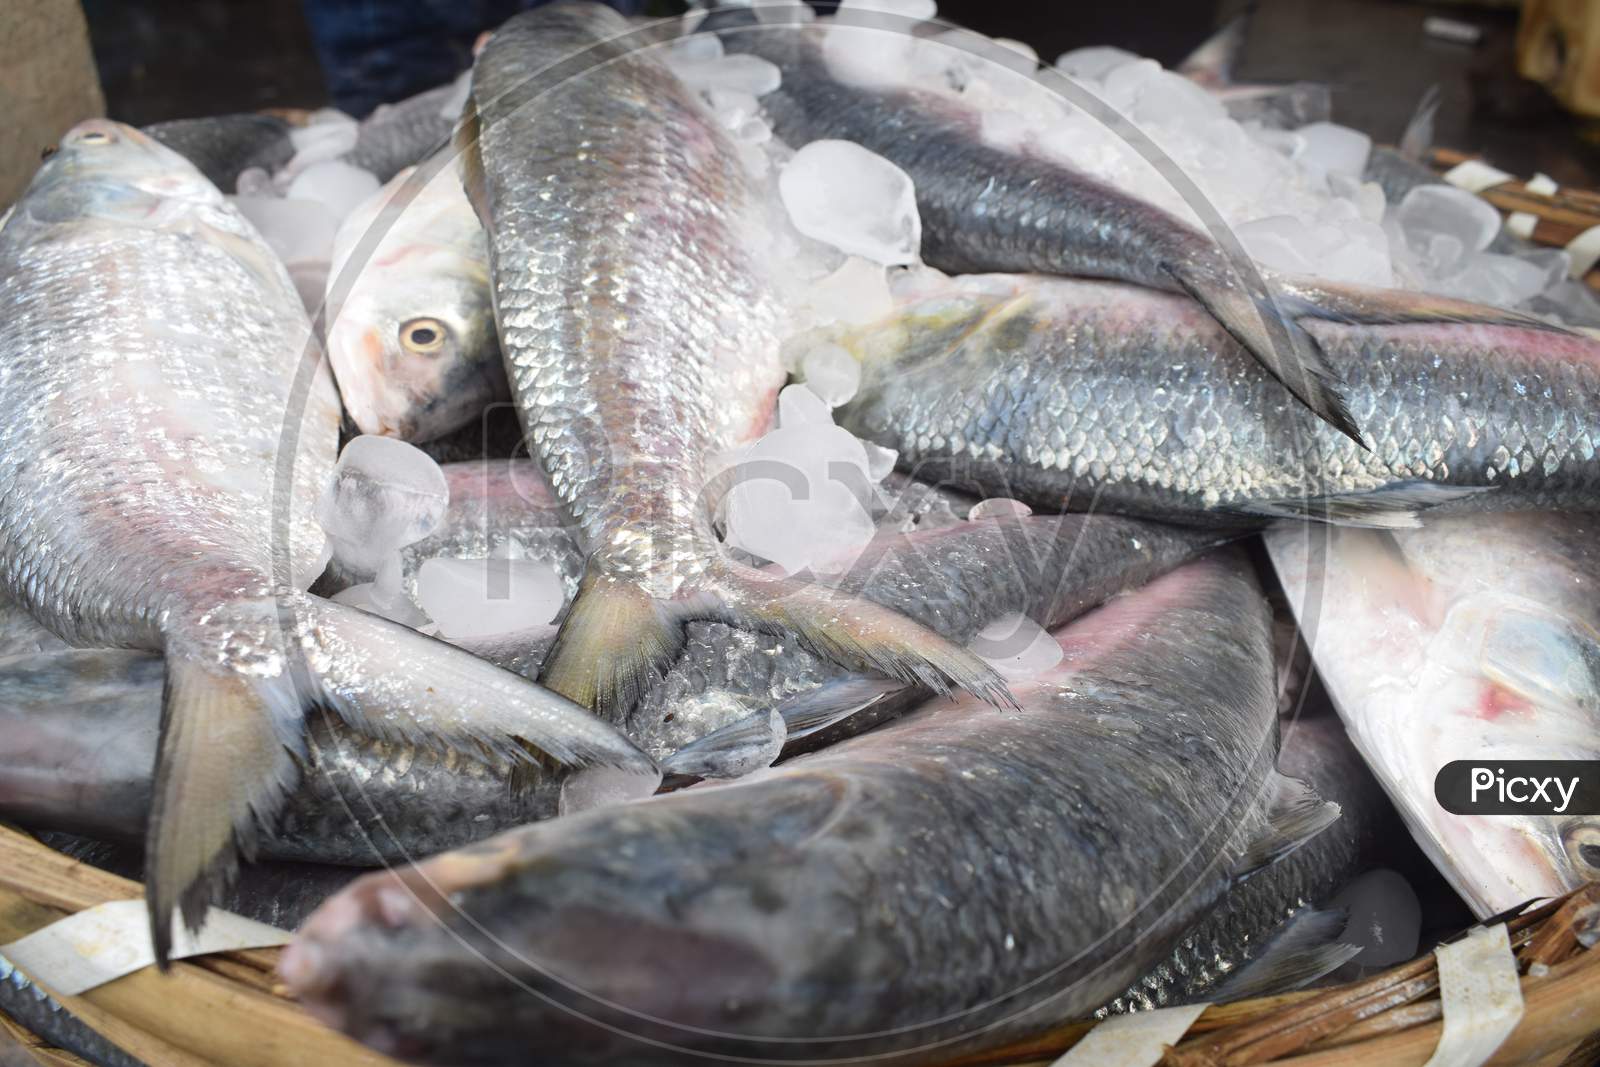 Ilish Selling In The Market At Digha, West Bengal